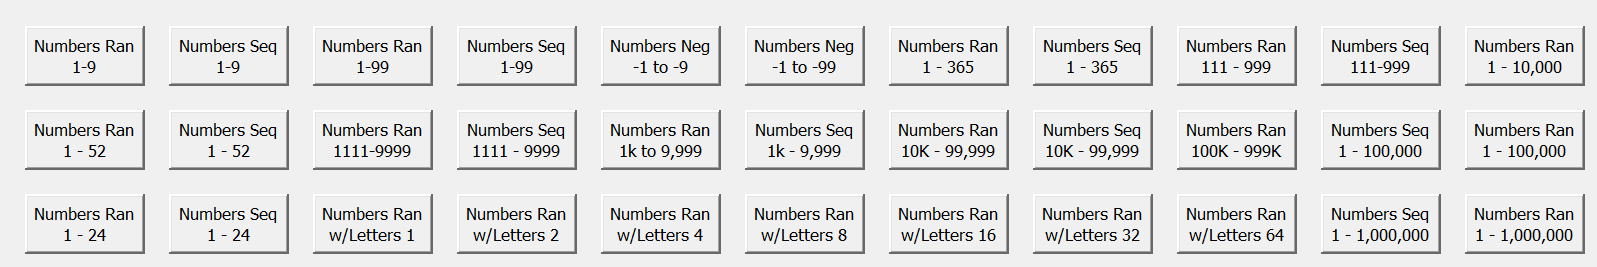 Pre-Built Number and Date Types